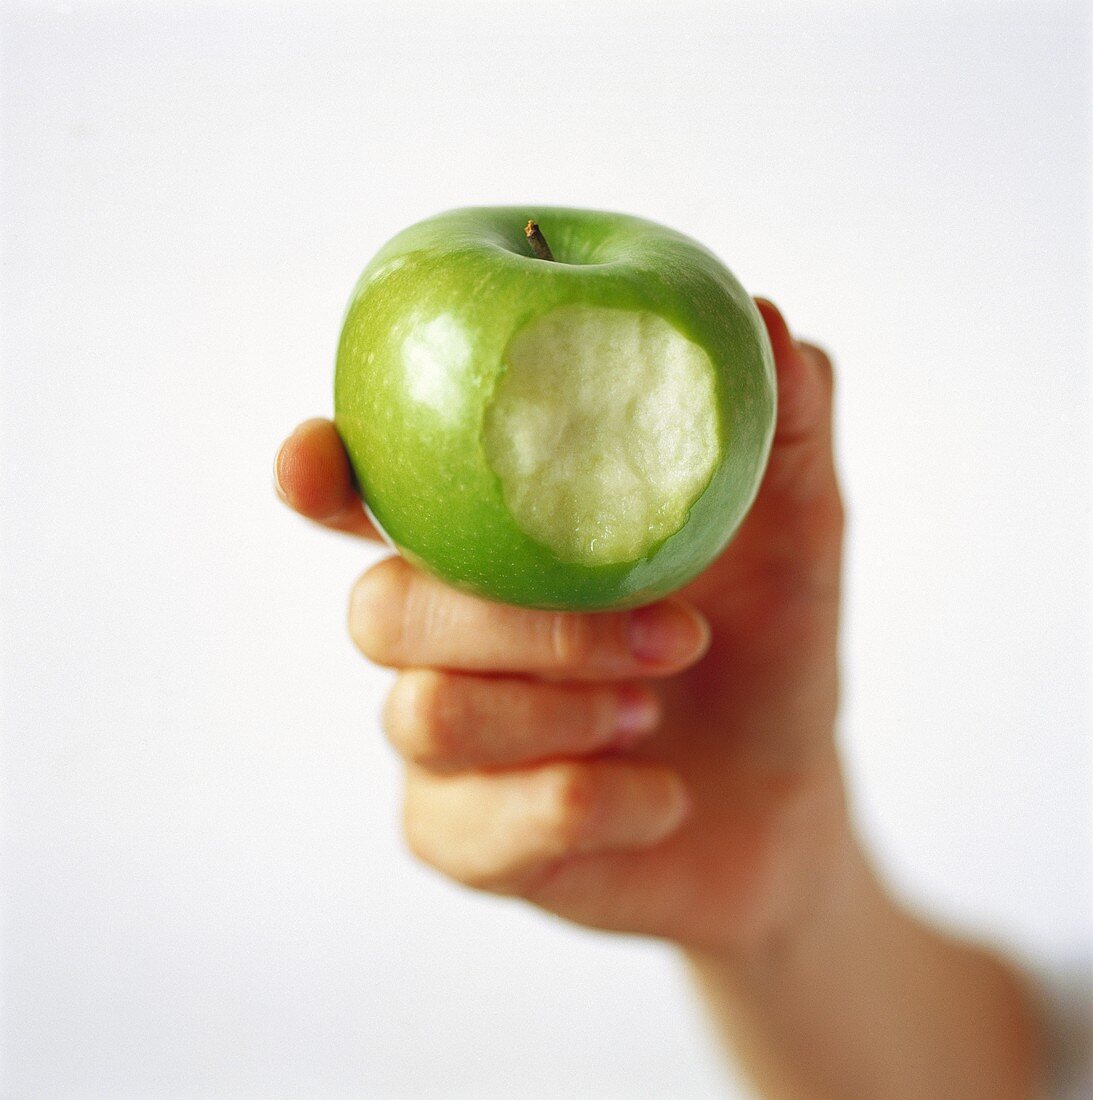 Hand holding a green apple with a bite taken